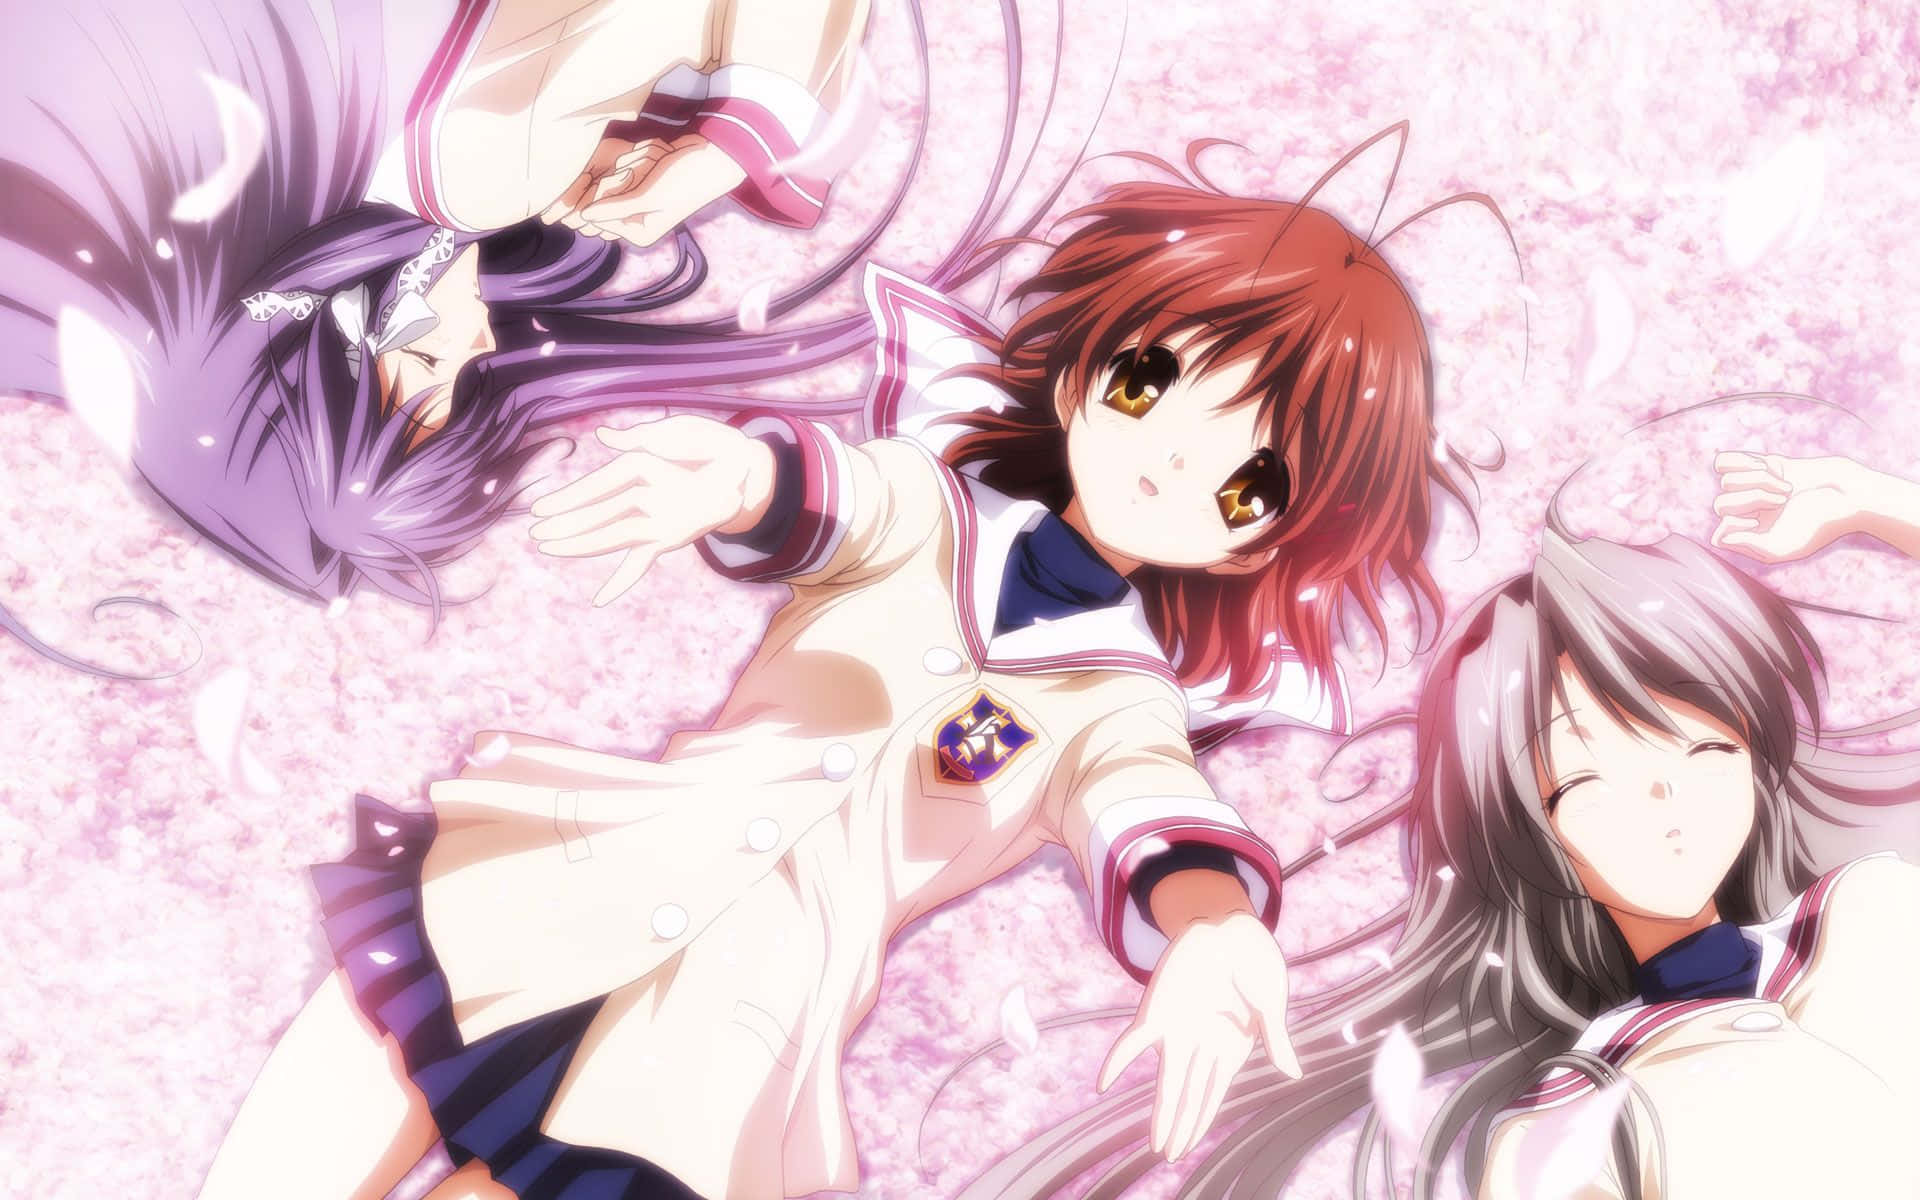 Emotion-filled Journey Of Life - Clannad After Story Wallpaper